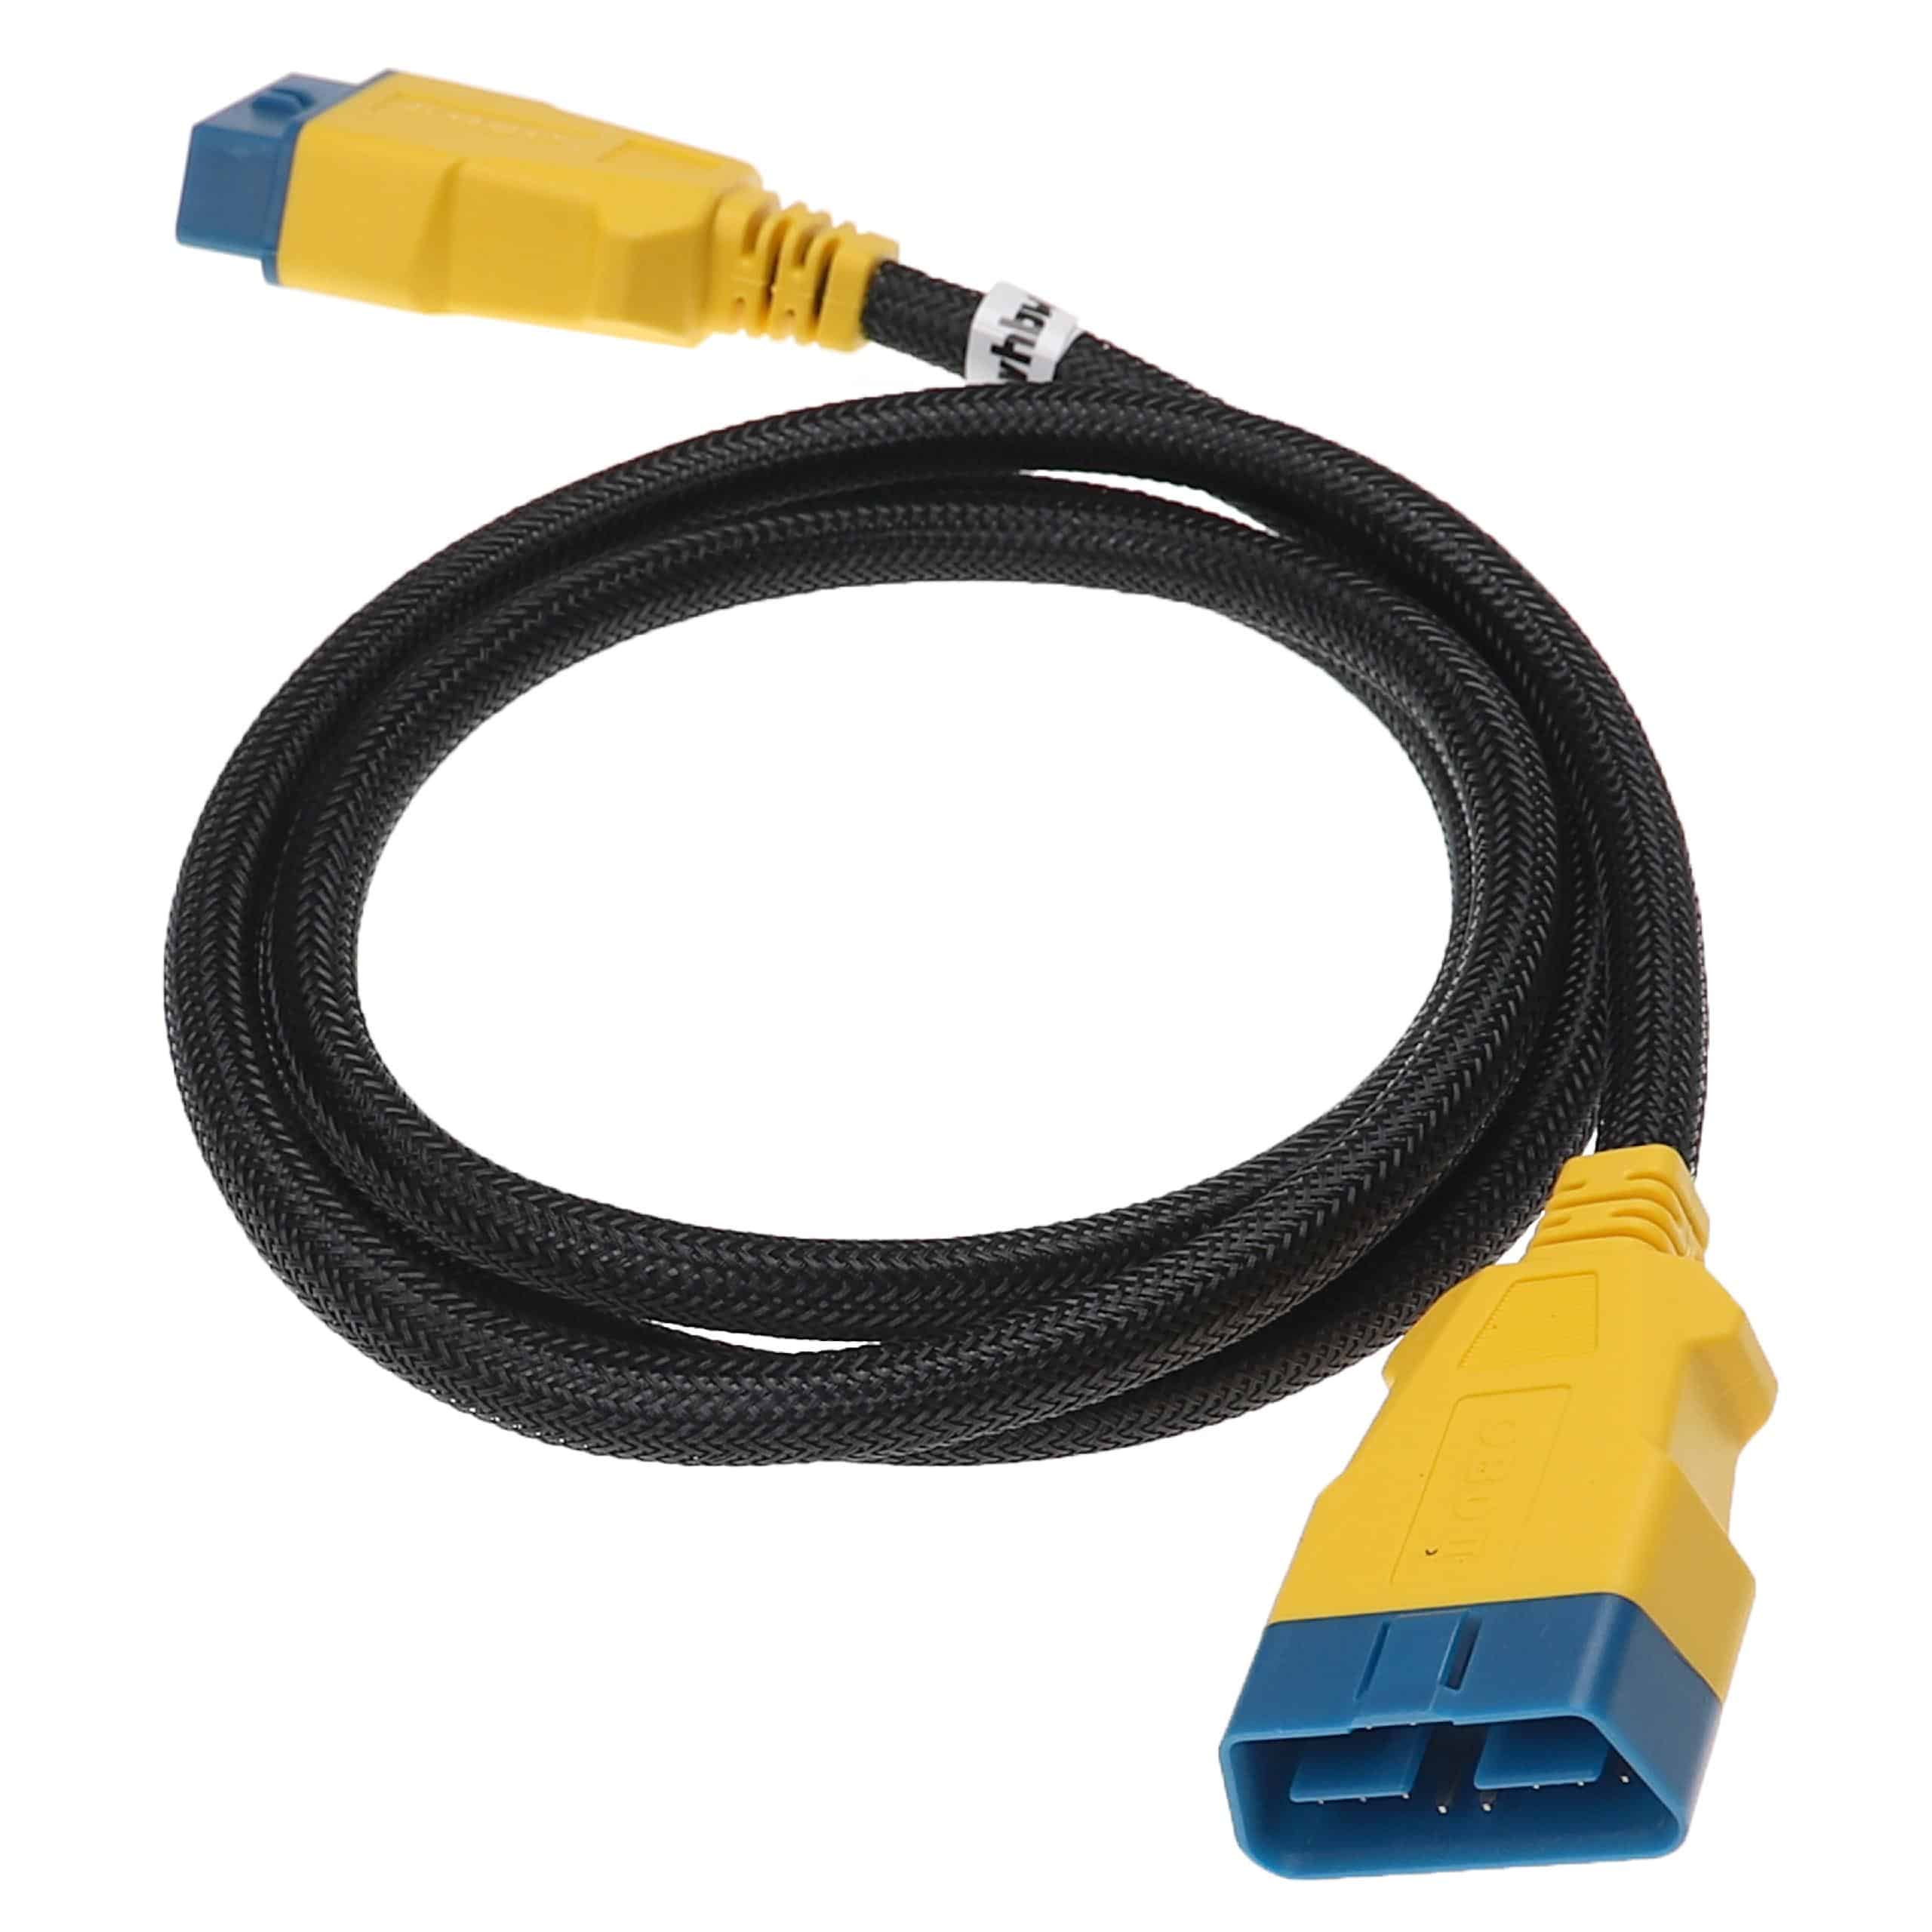 vhbw OBD2 Extension Cable 16 Pin (f) to 16 Pin (m) for LKW, Car, Vehicle - 150 cm